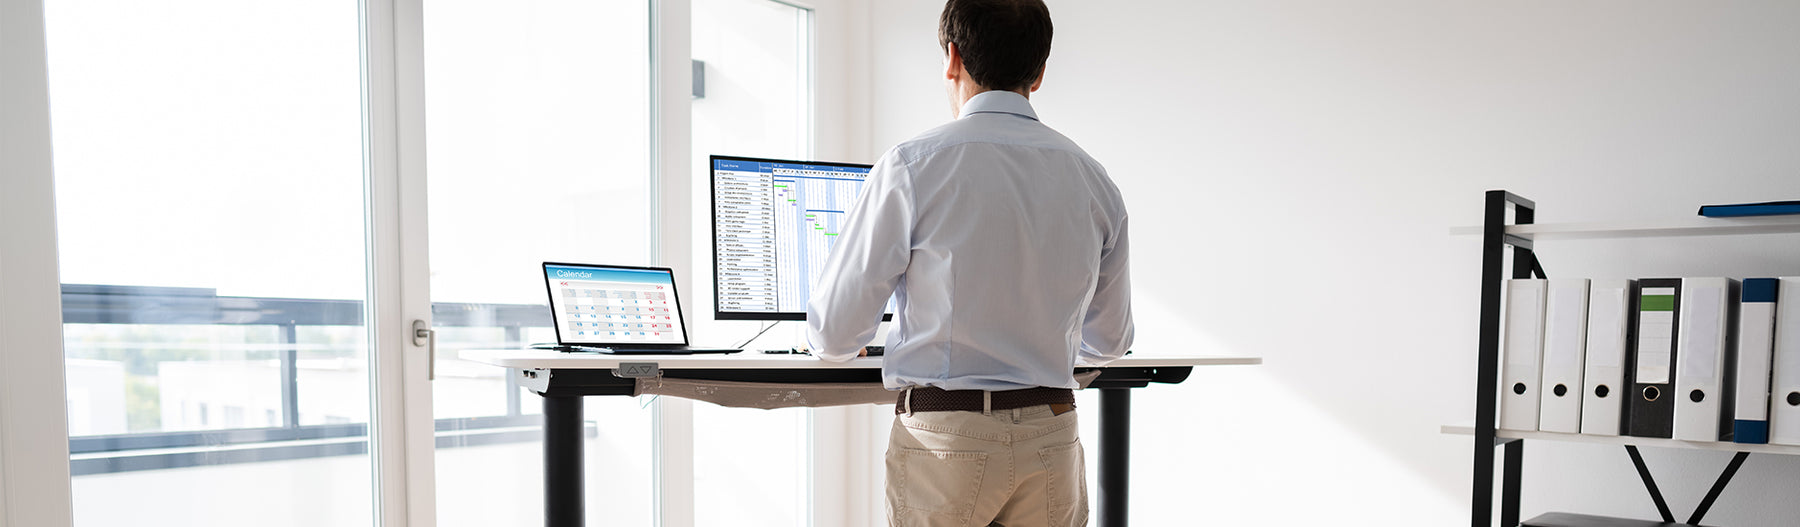 Maximize Your Productivity and Health: The Benefits of Sit-Stand Desks